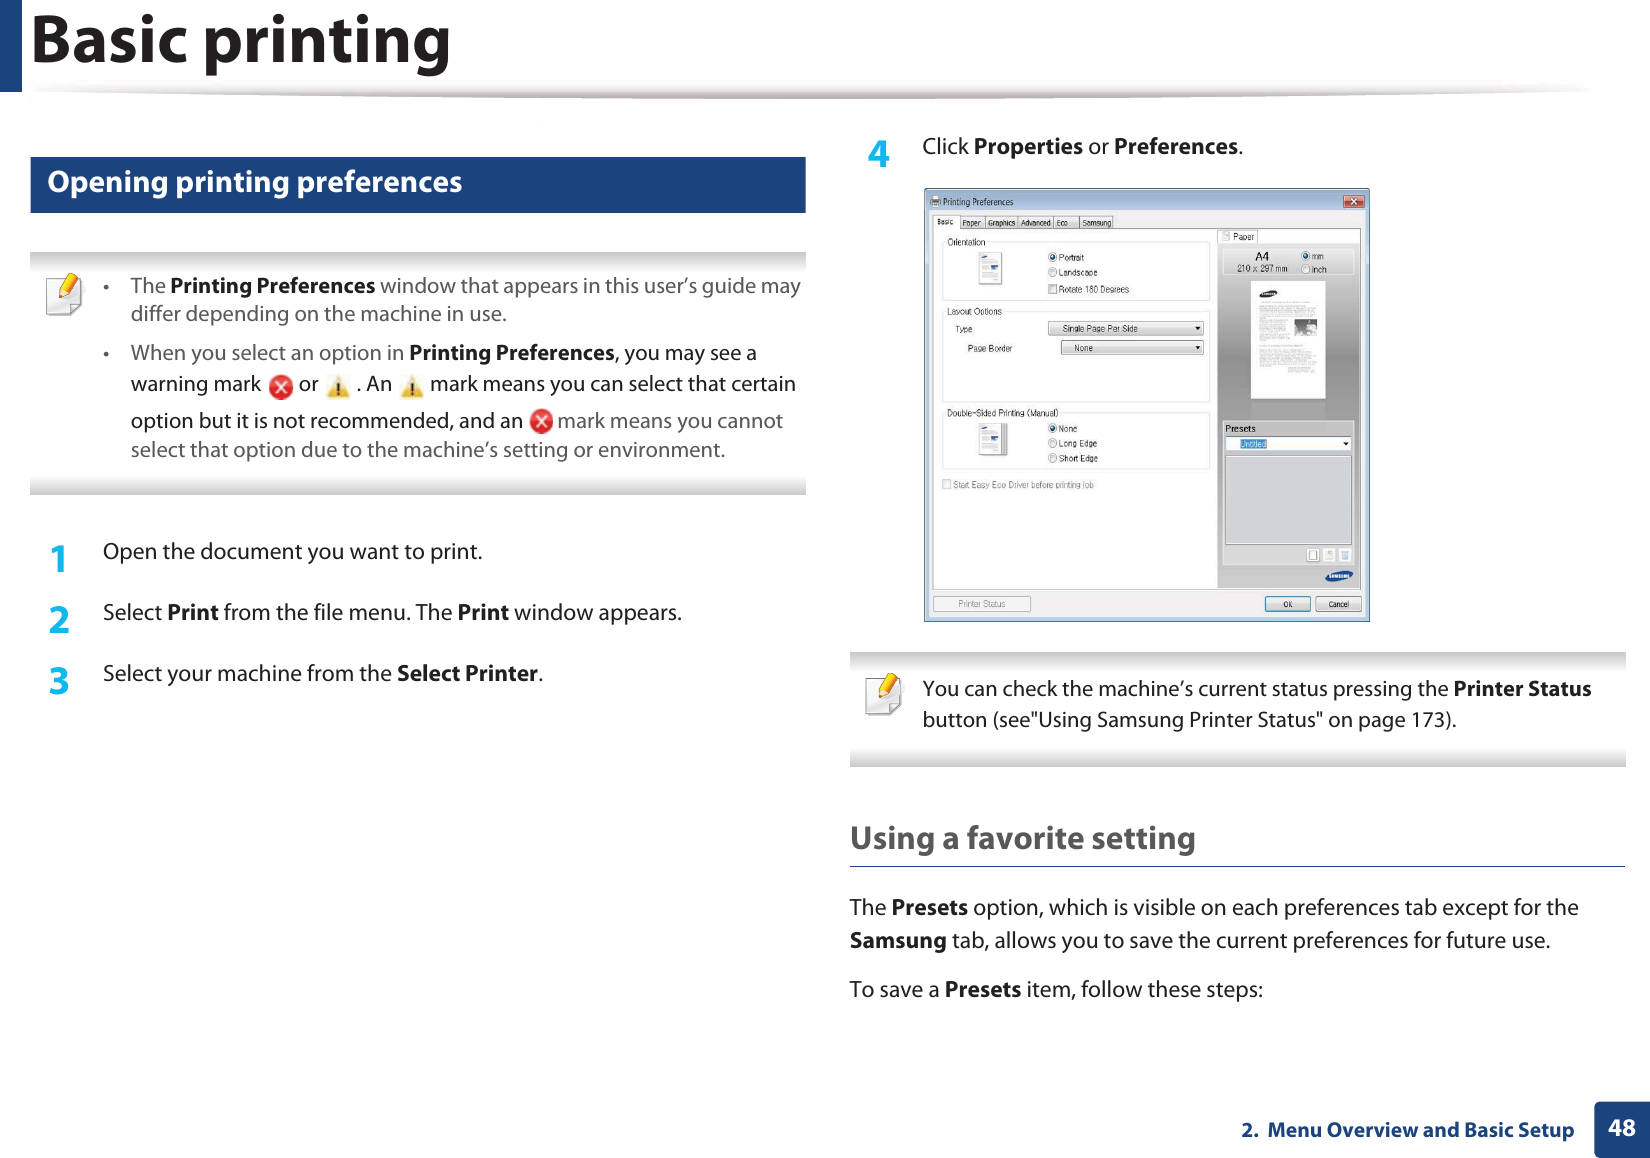 Basic printing482.  Menu Overview and Basic Setup12 Opening printing preferences • The Printing Preferences window that appears in this user’s guide may differ depending on the machine in use.• When you select an option in Printing Preferences, you may see a warning mark   or   . An   mark means you can select that certain option but it is not recommended, and an   mark means you cannot select that option due to the machine’s setting or environment. 1Open the document you want to print.2  Select Print from the file menu. The Print window appears.3  Select your machine from the Select Printer.4  Click Properties or Preferences. You can check the machine’s current status pressing the Printer Status button (see&quot;Using Samsung Printer Status&quot; on page 173). Using a favorite settingThe Presets option, which is visible on each preferences tab except for the Samsung tab, allows you to save the current preferences for future use.To save a Presets item, follow these steps: